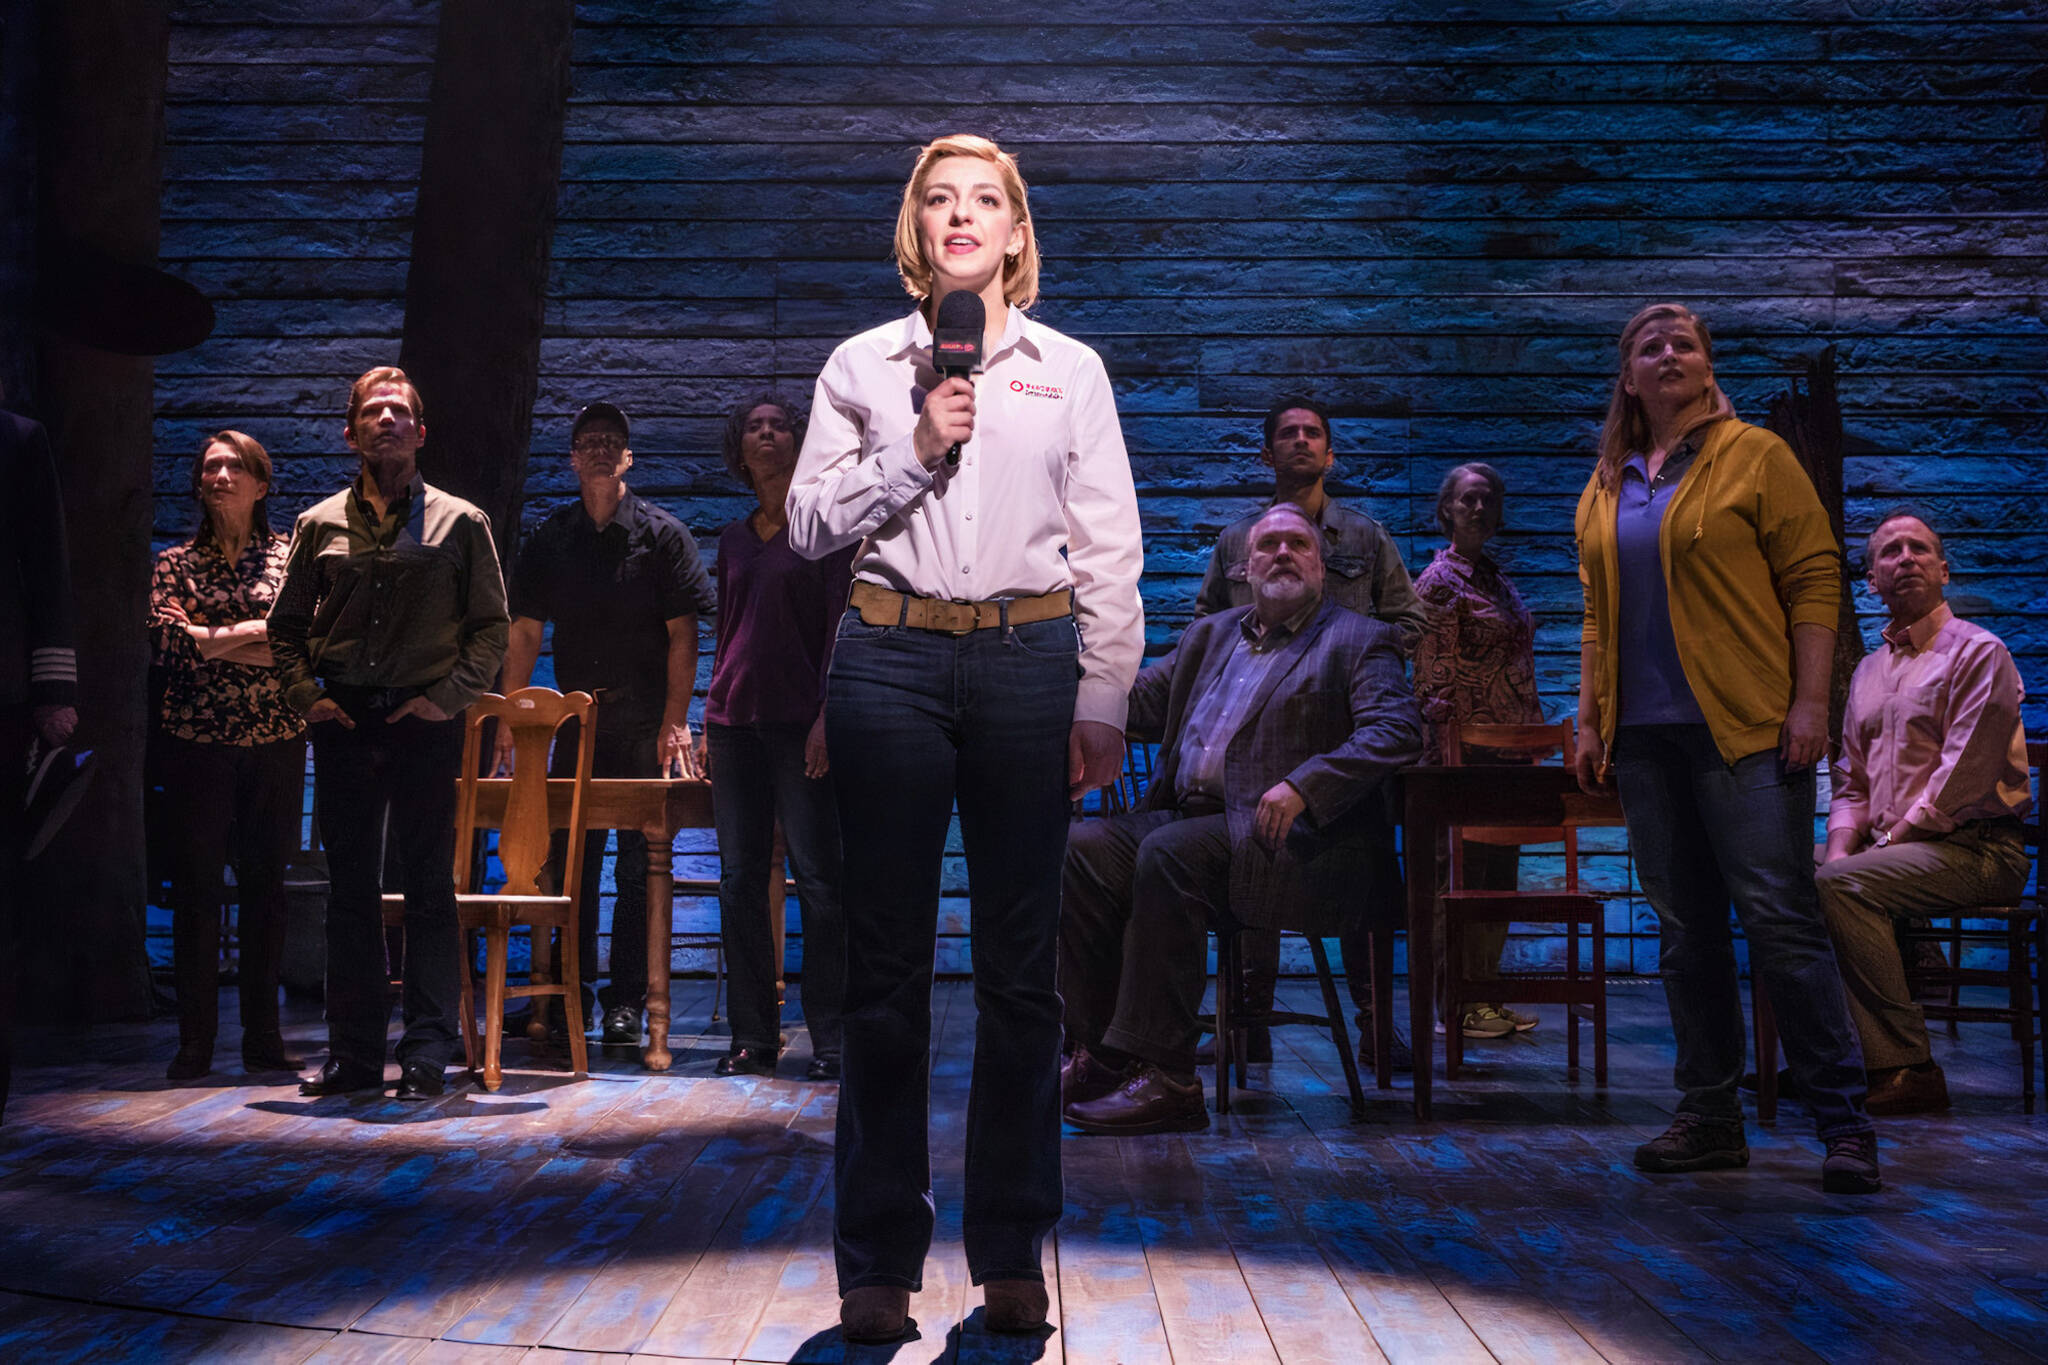 Actor who starred in Come From Away shares what life has been like